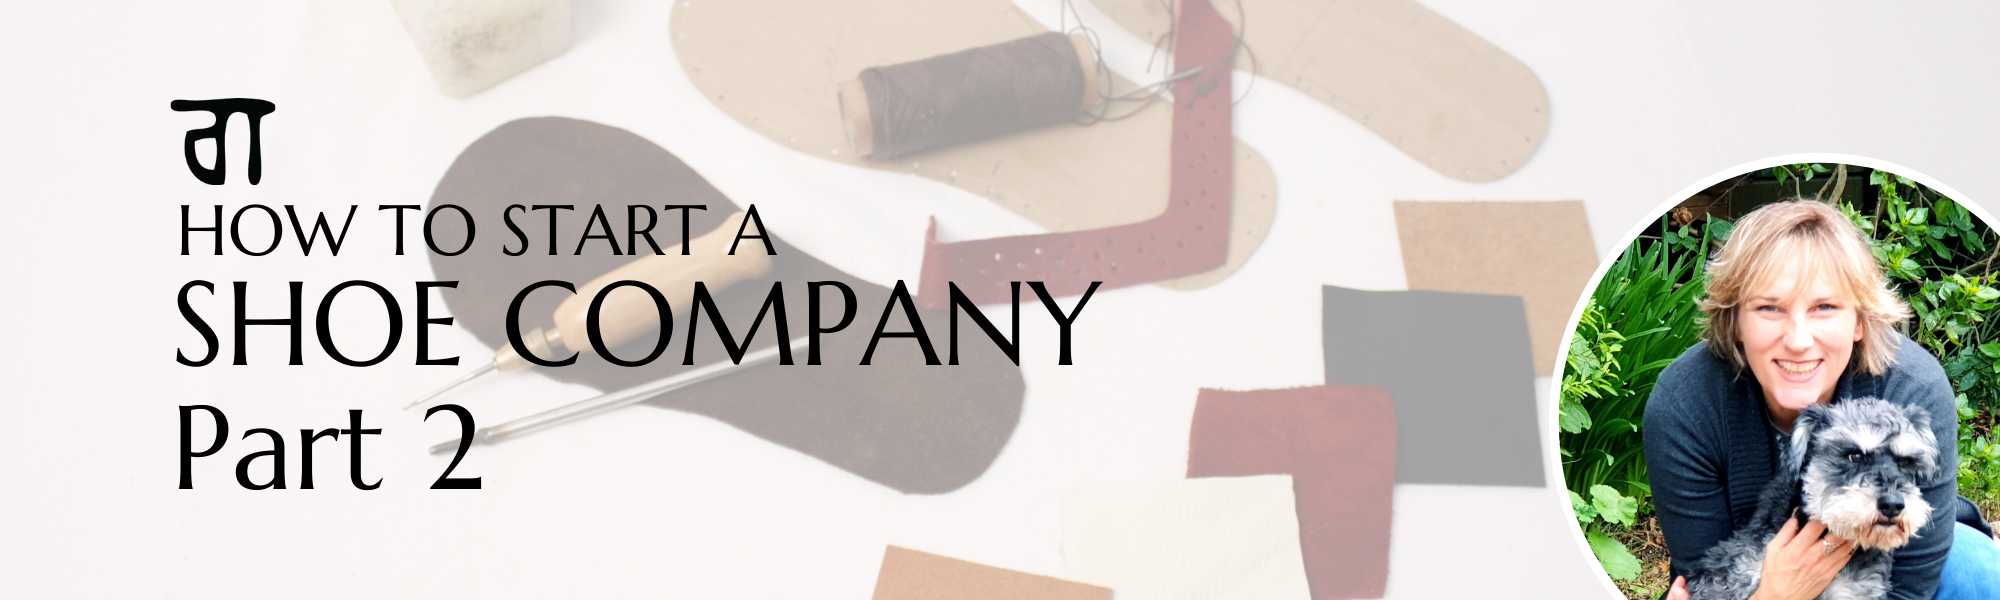 How to start a shoe company Part 2